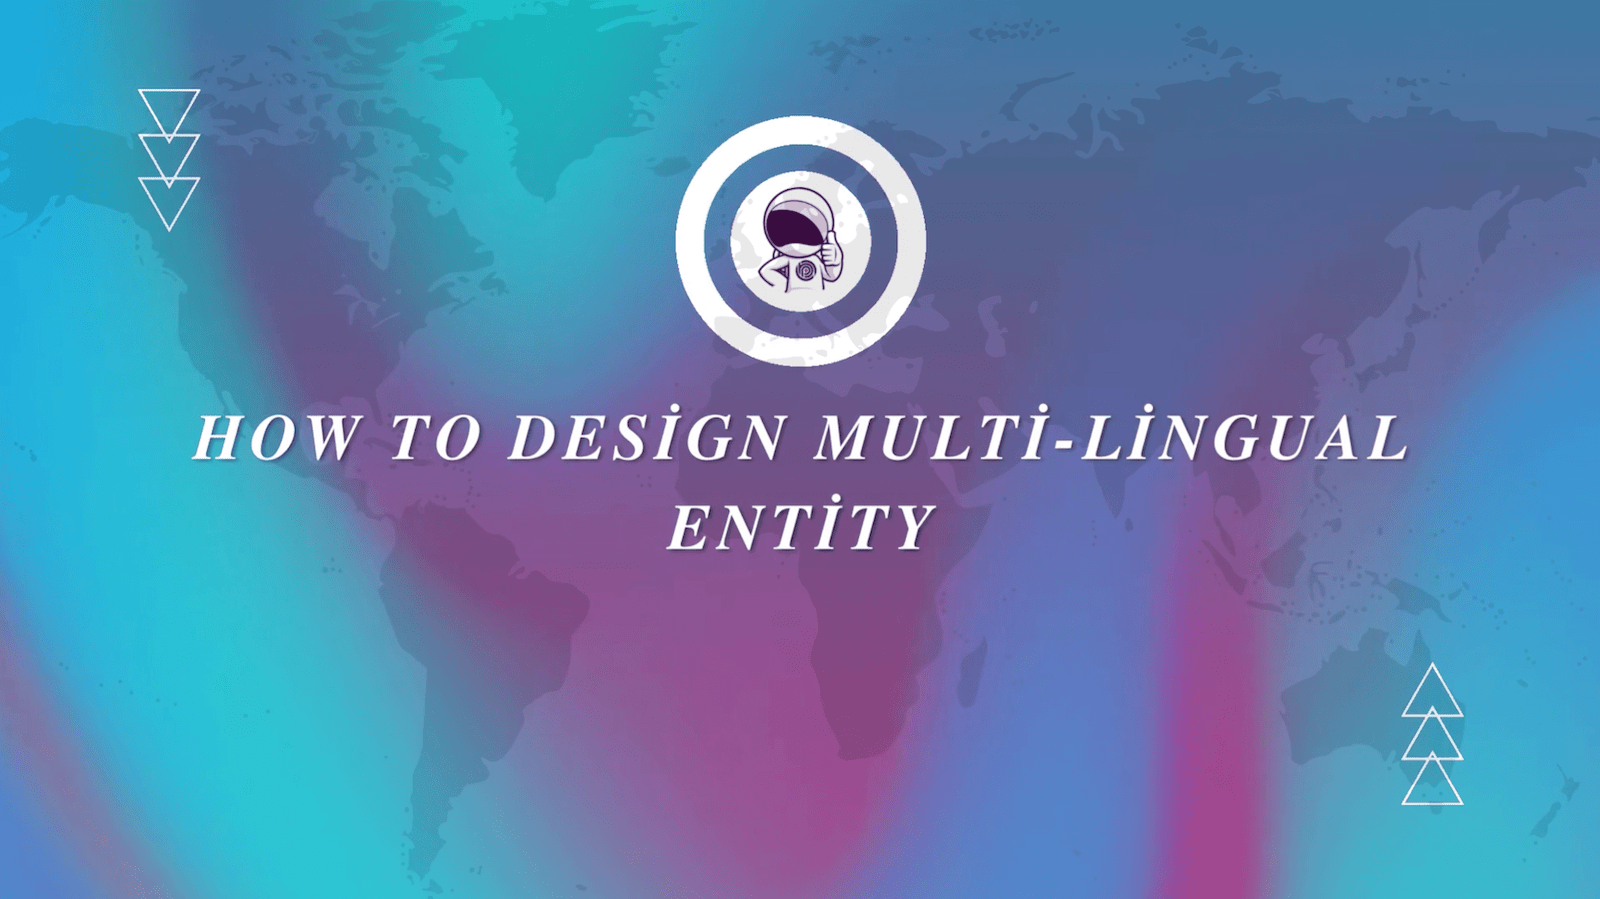 How to Design Multi-Lingual Entity